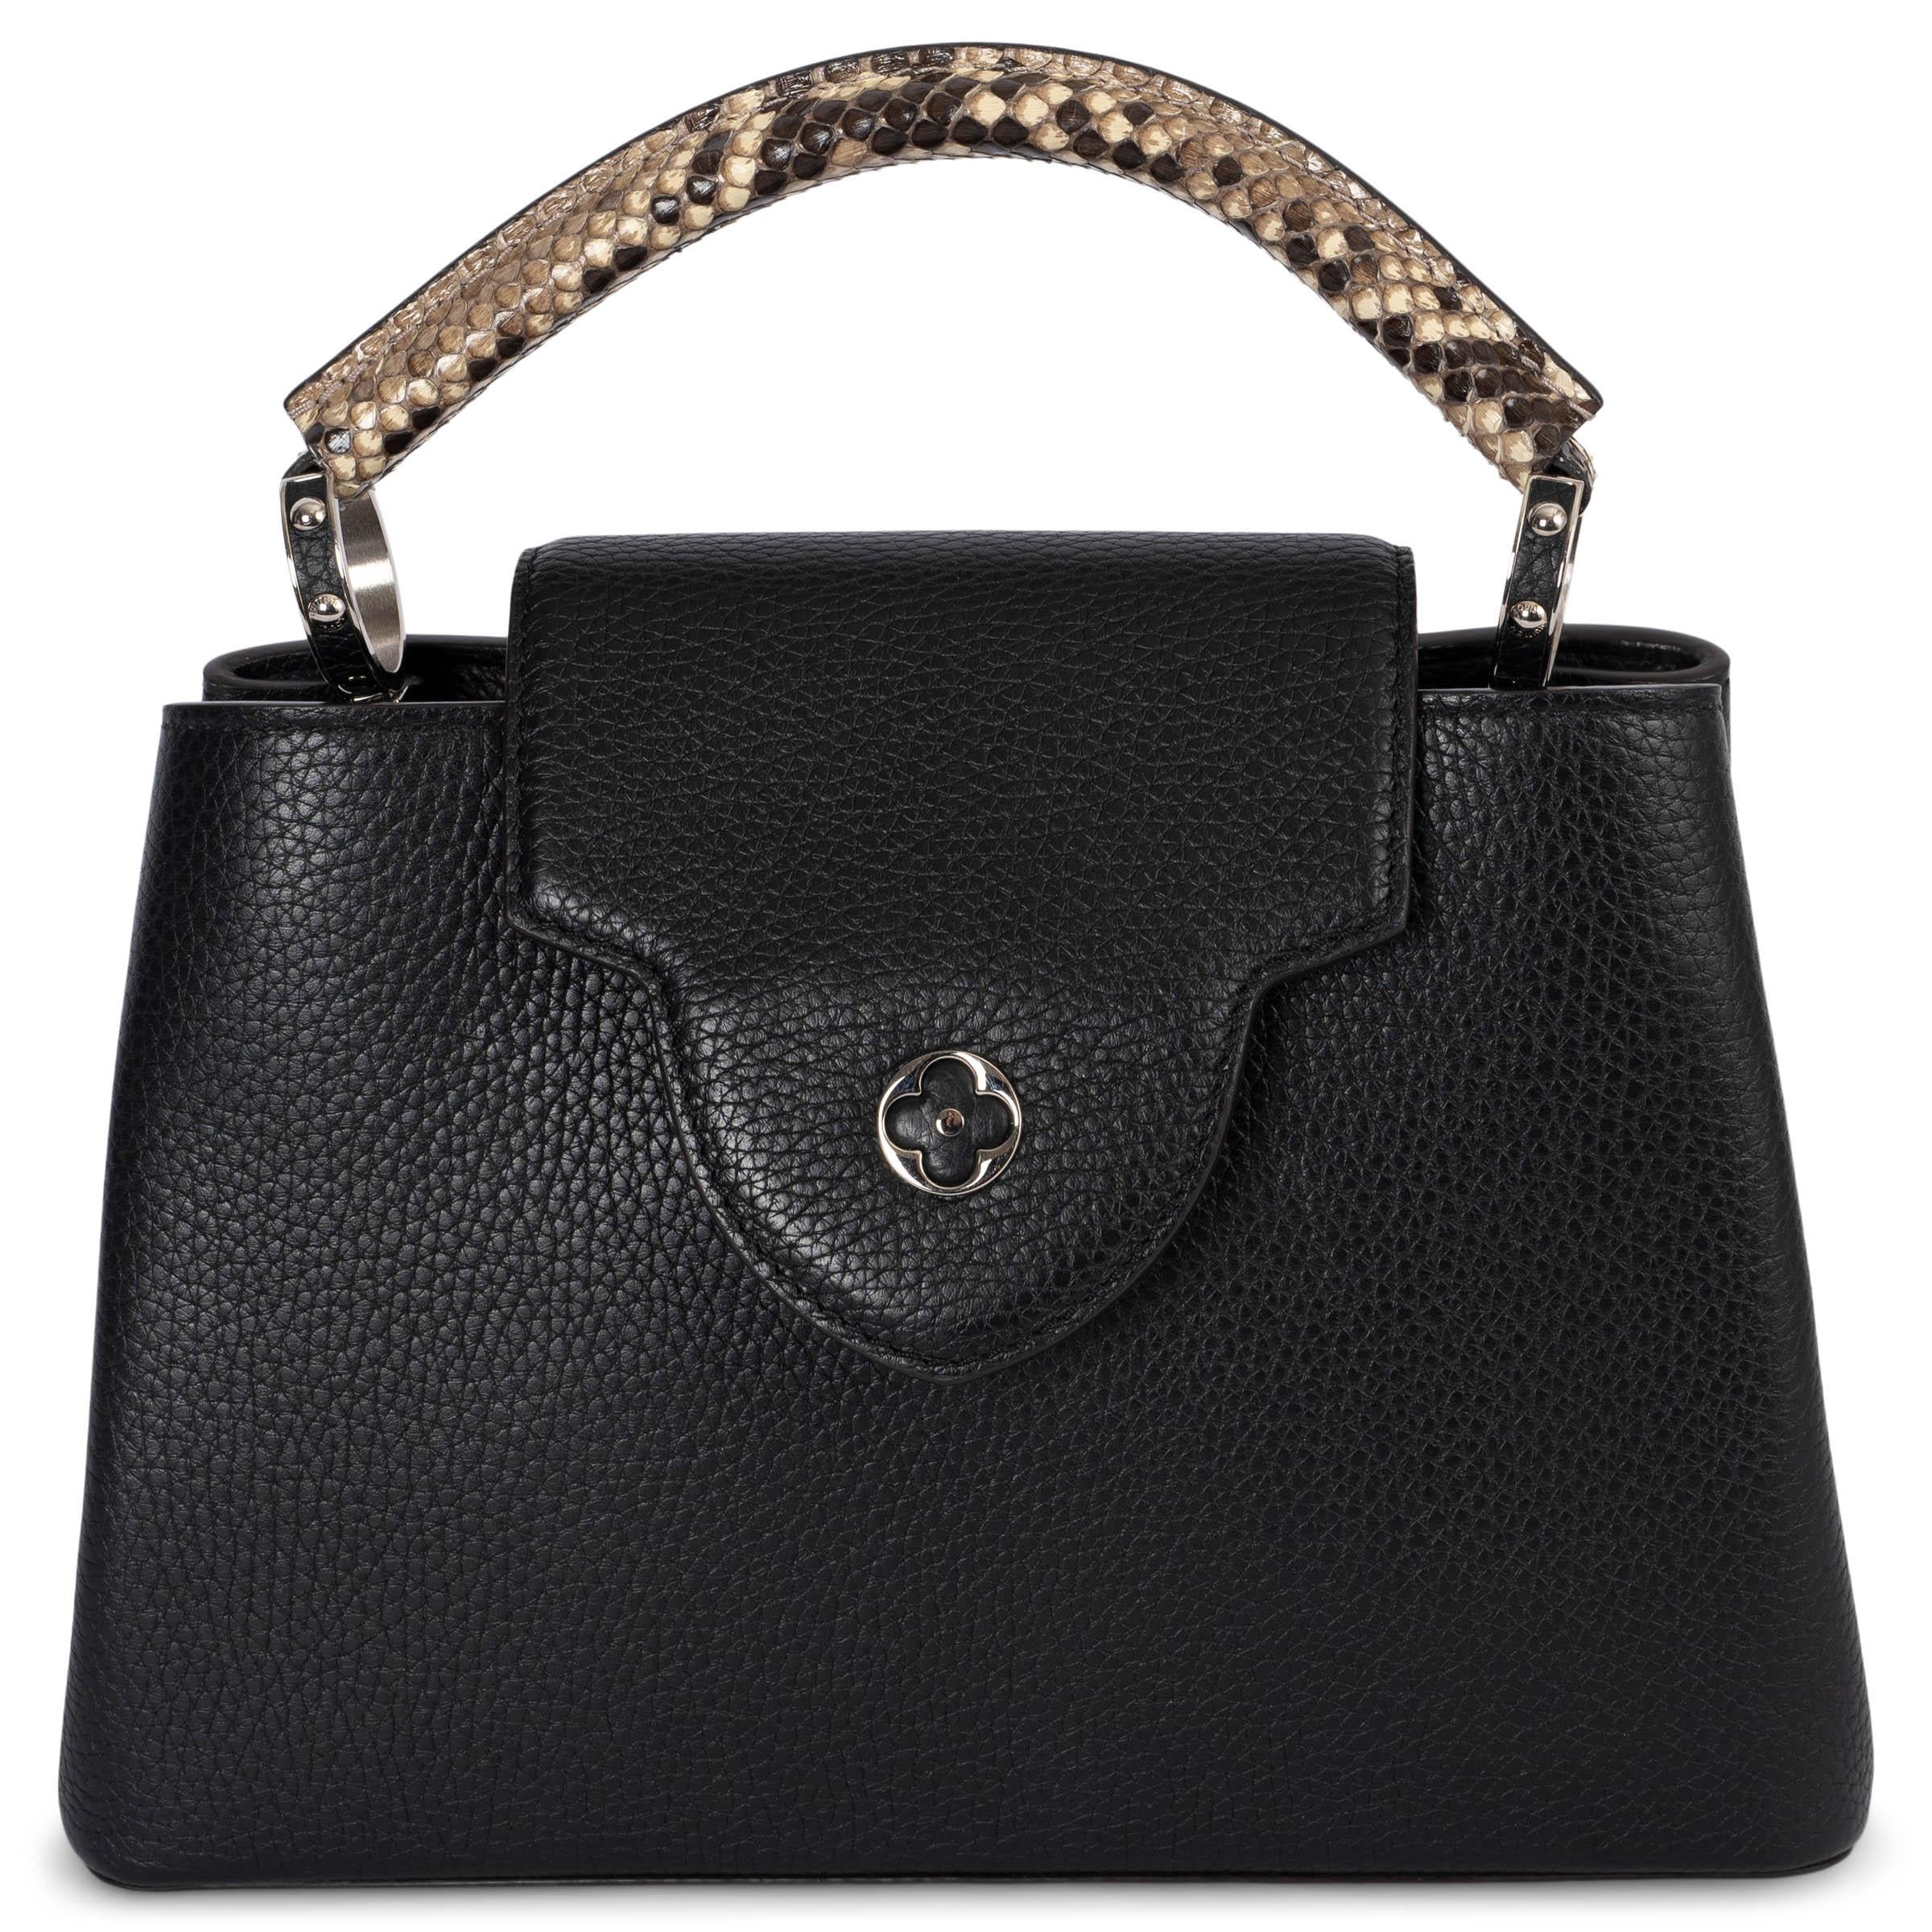 100% authentic Louis Vuitton Capucines MM bag in black full-grain Taurillon leather, it features a distinctive flap which can be worn two ways: outside to reveal a Monogram Flower, or inside to display the leather-wrapped LV Initials. This elevated